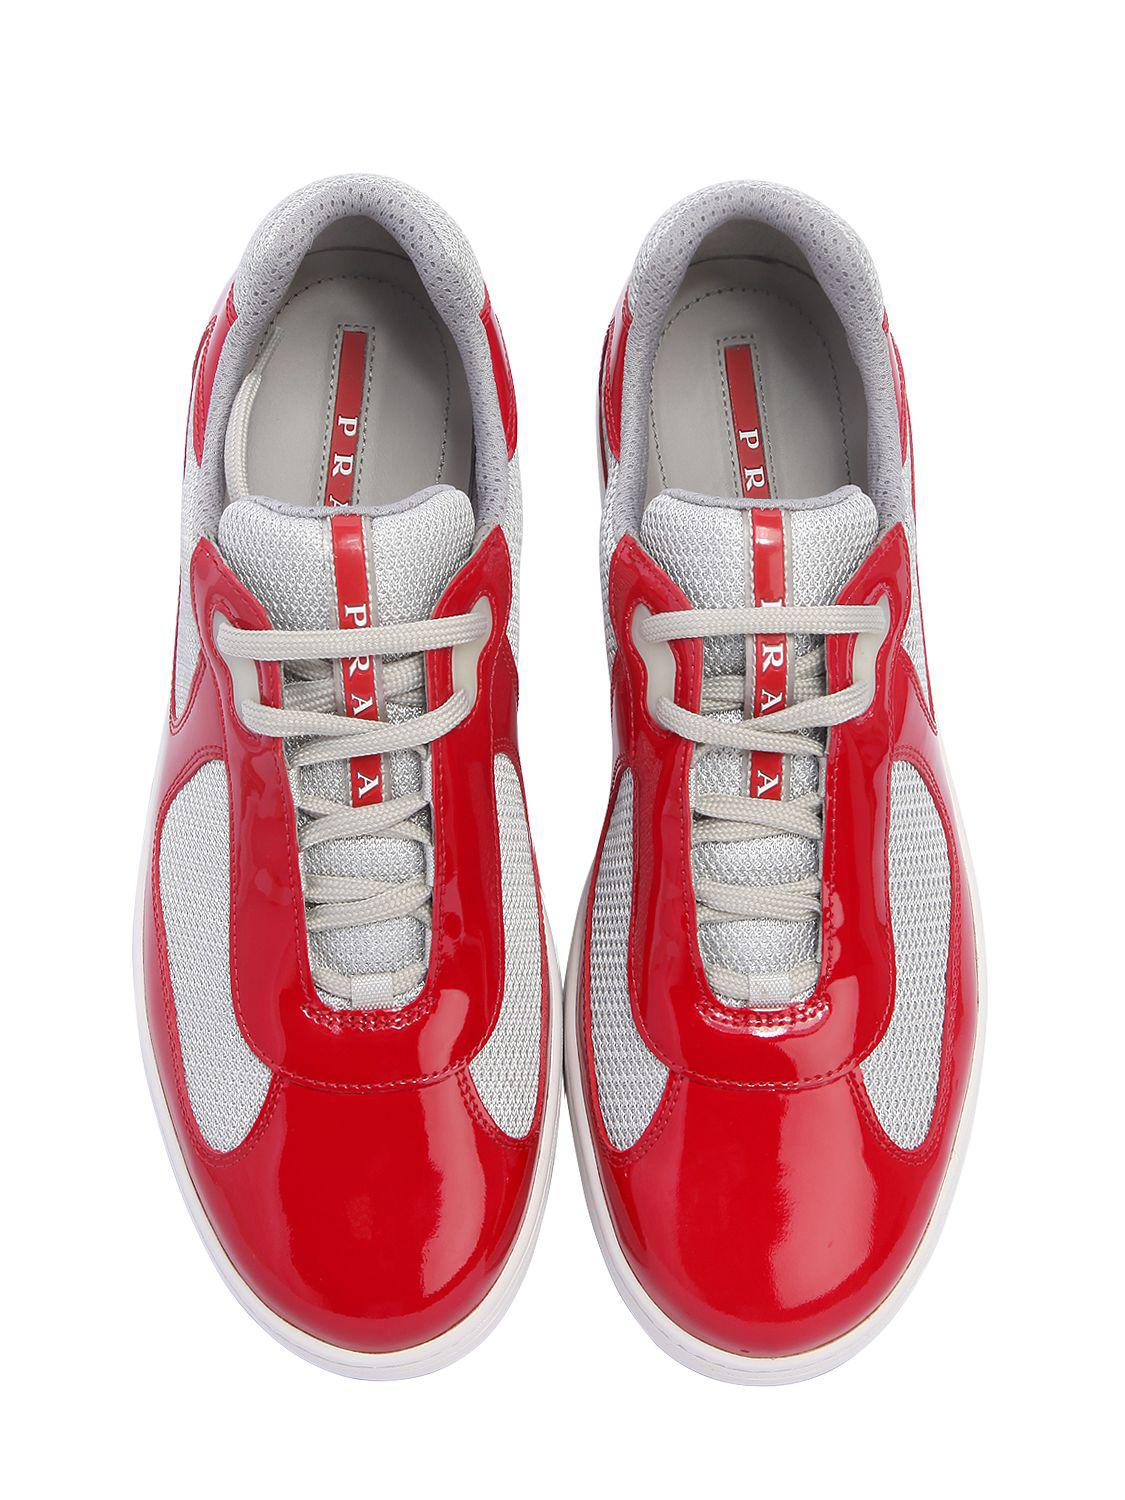 Prada Men's Shoes Leather Trainers Sneakers in Red/Silver (Red) for Men -  Save 67% - Lyst